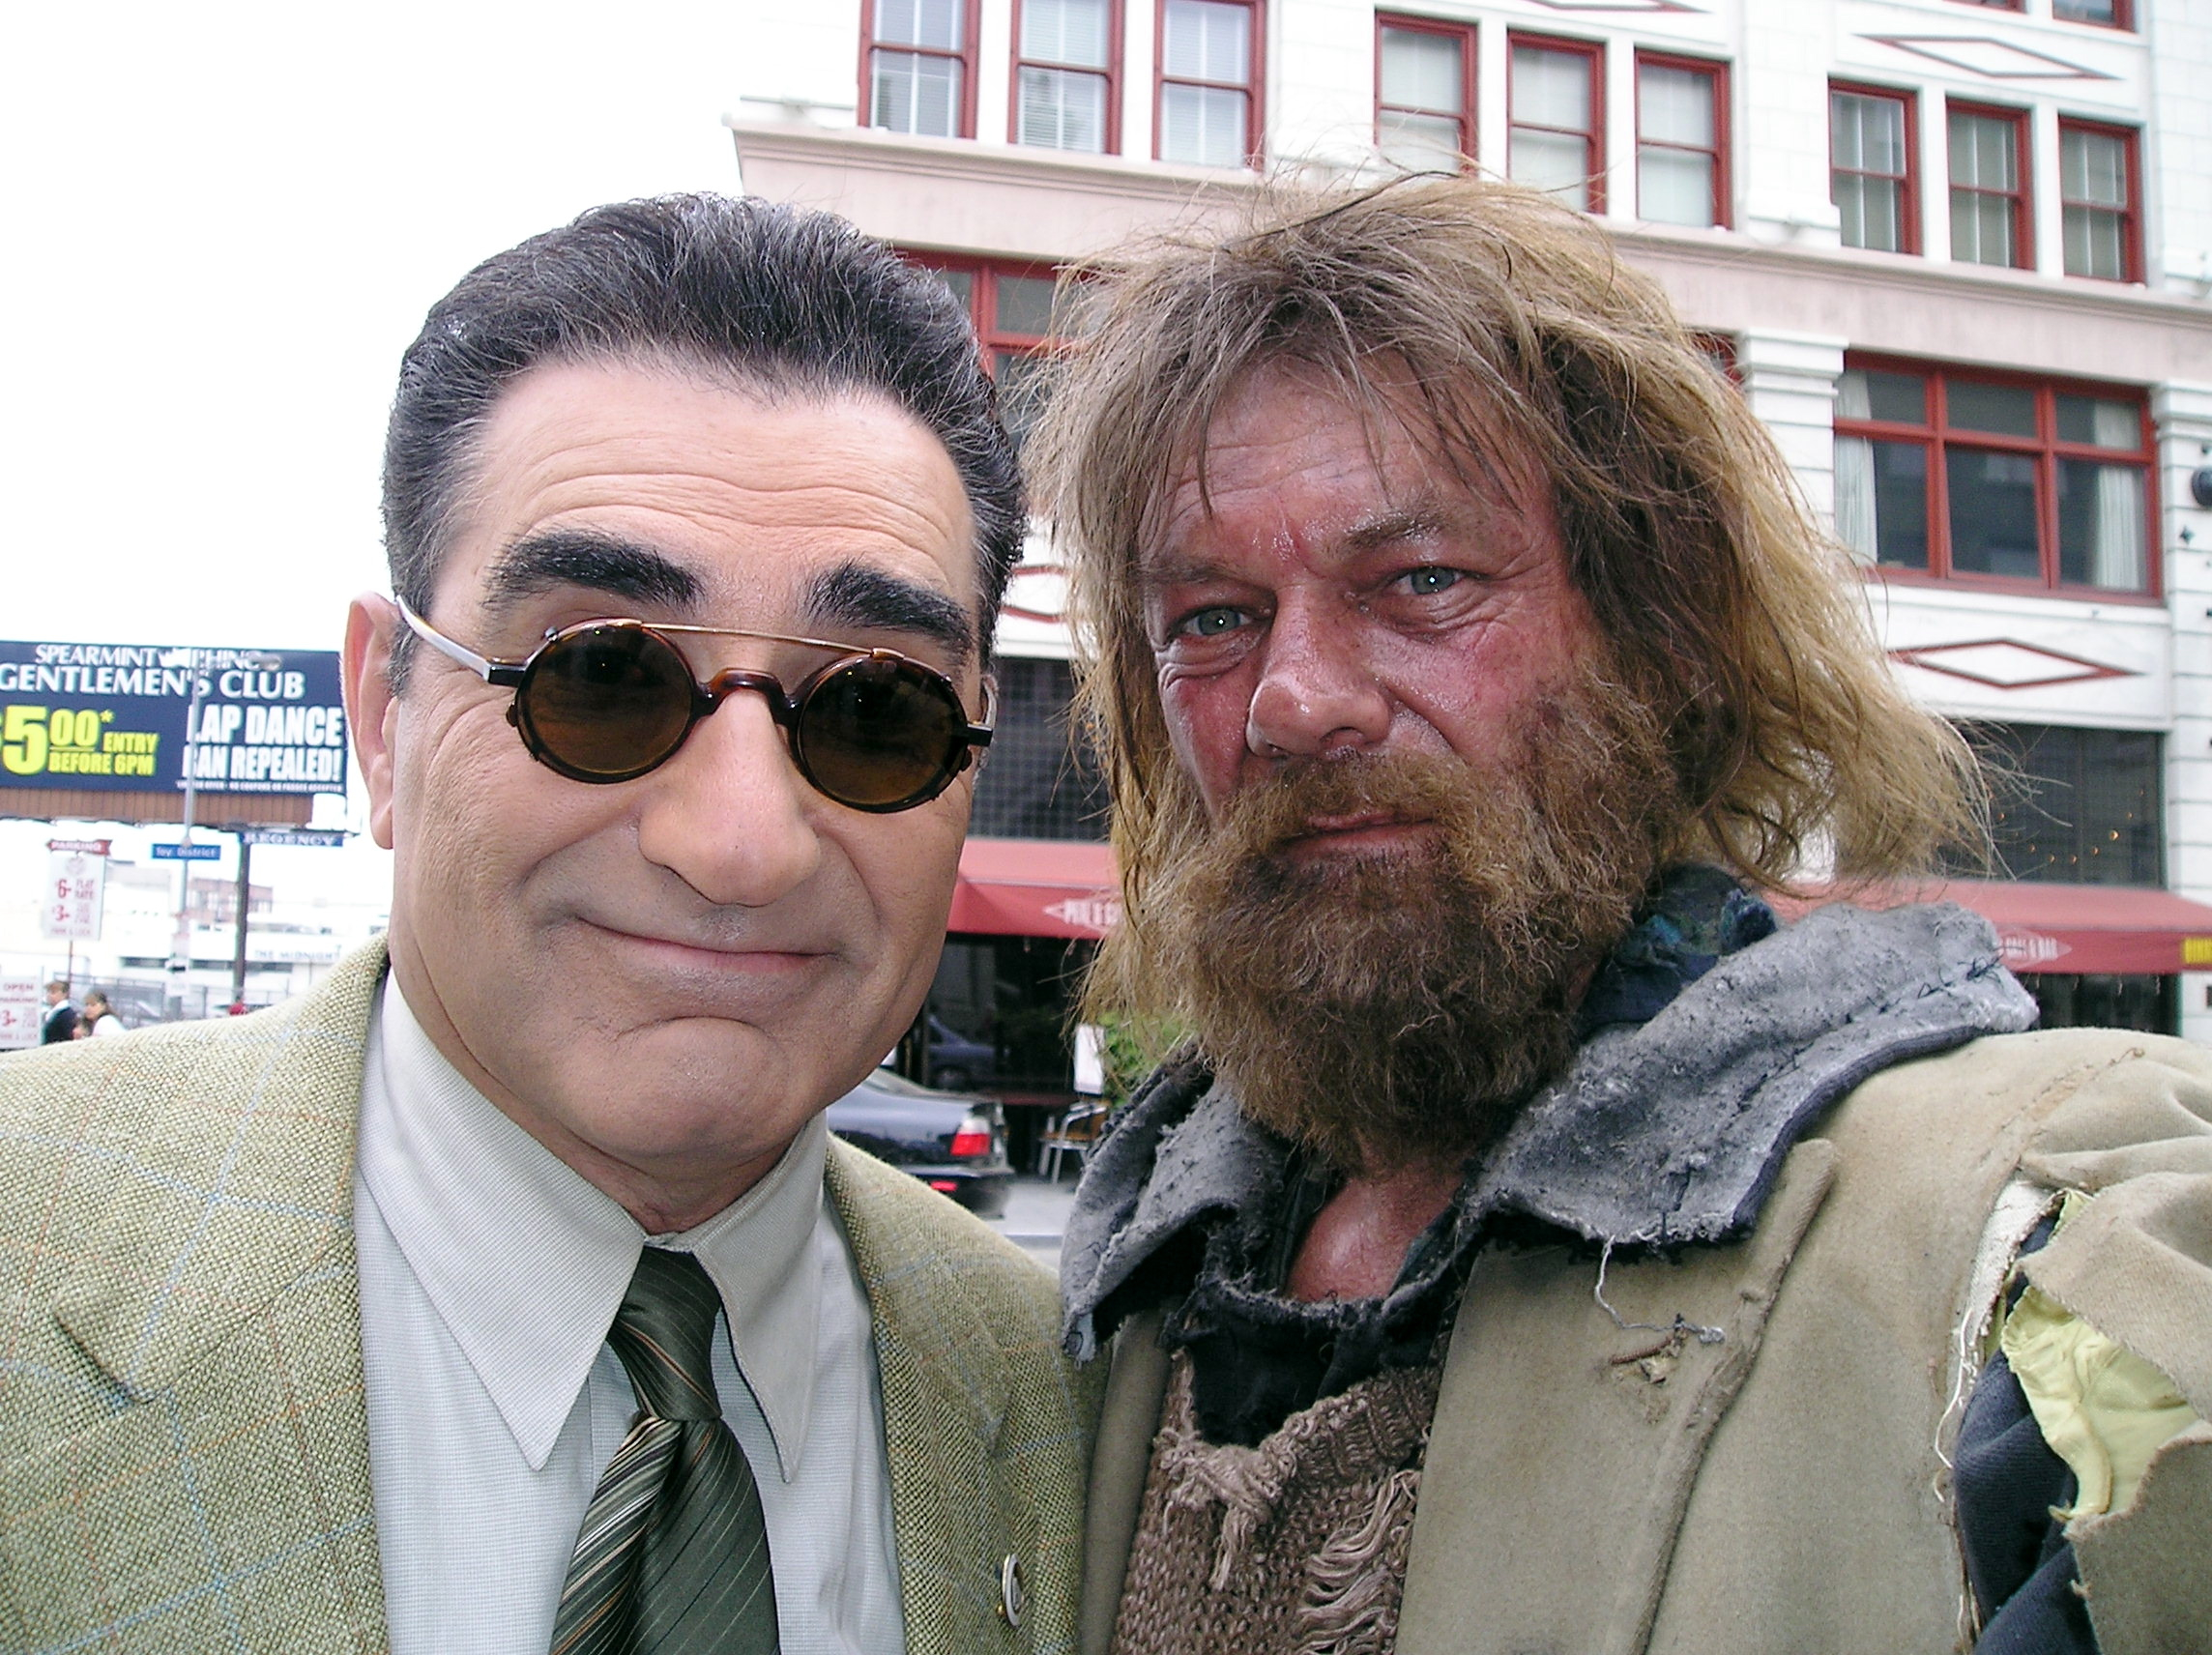 THE MAN- MURRAY, EUGENE LEVY